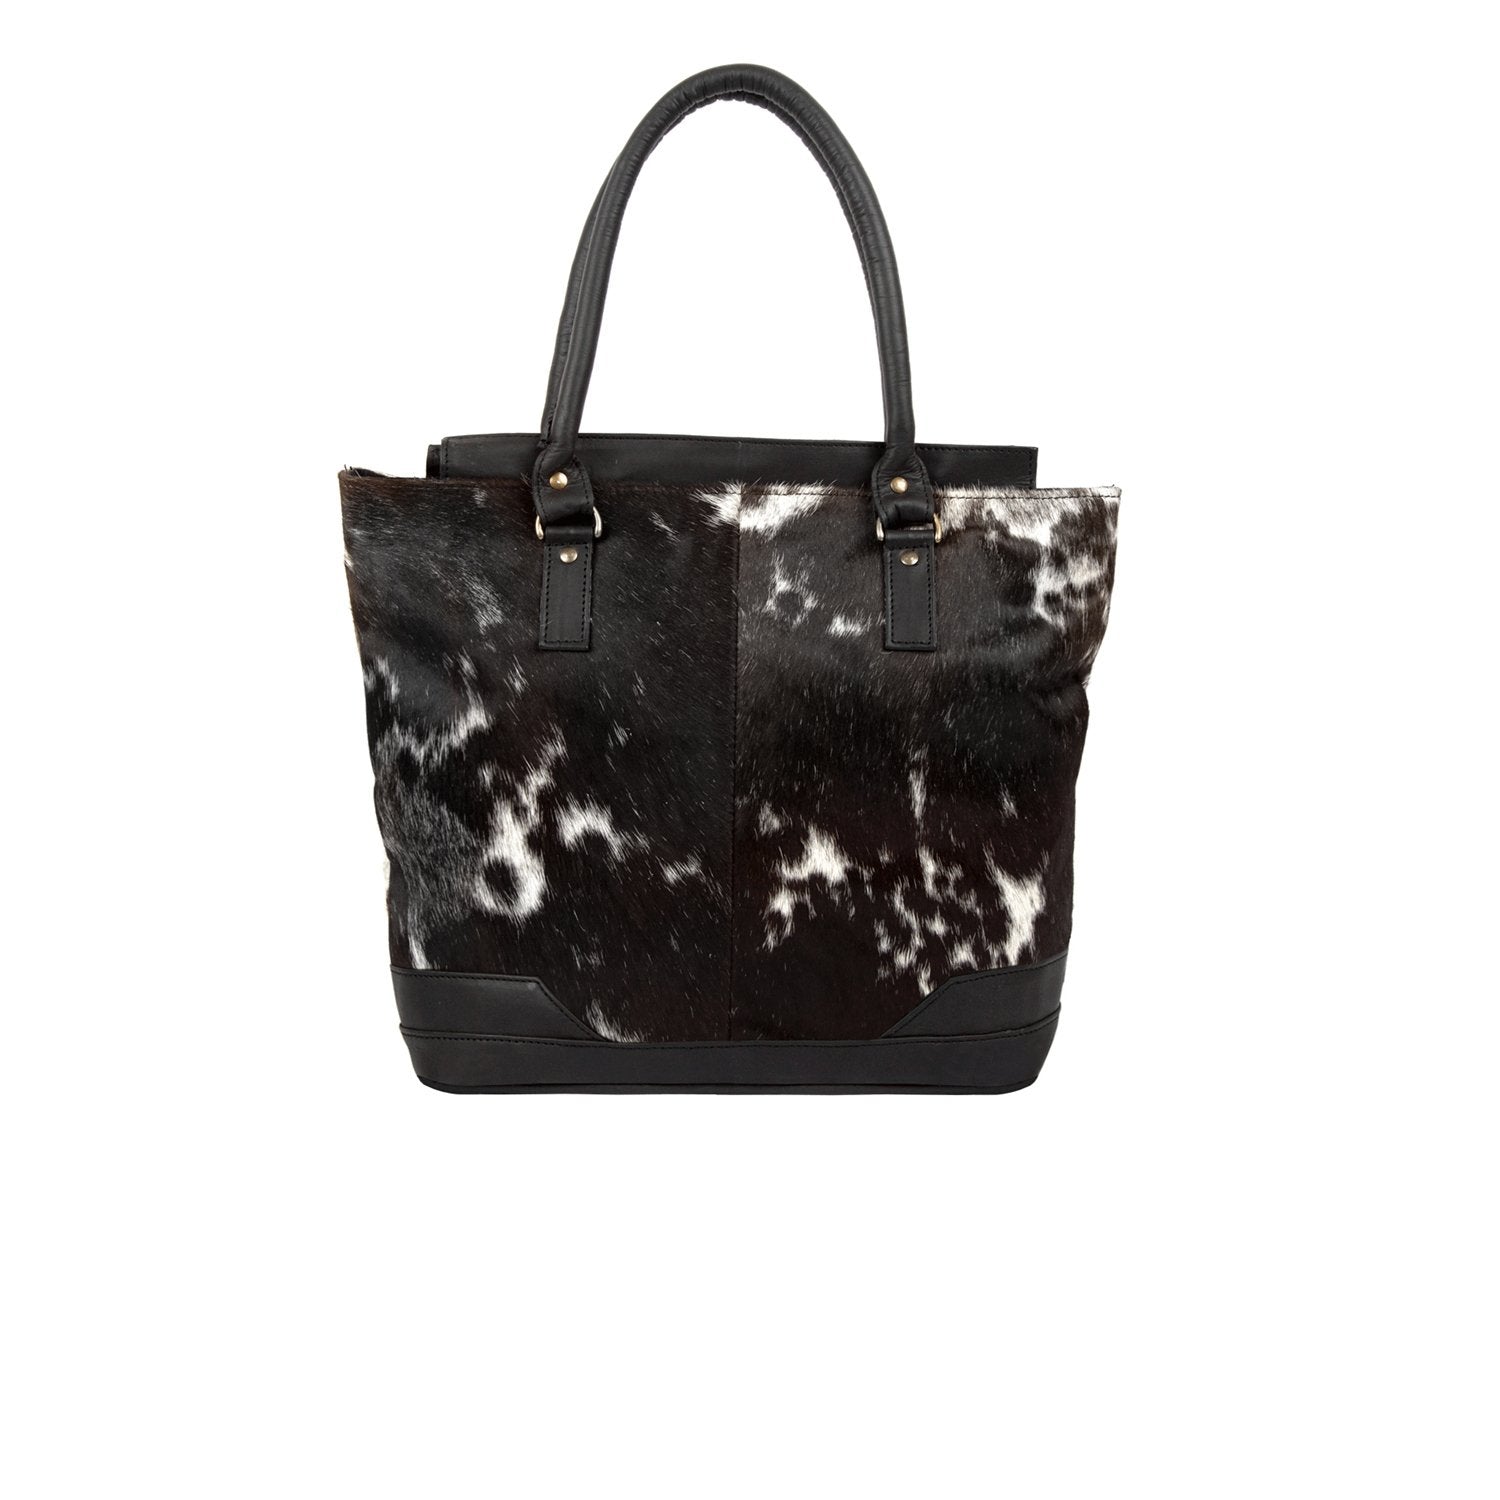 Black & White Pony Hair Leather Tote Bag For Her – MAHI Leather